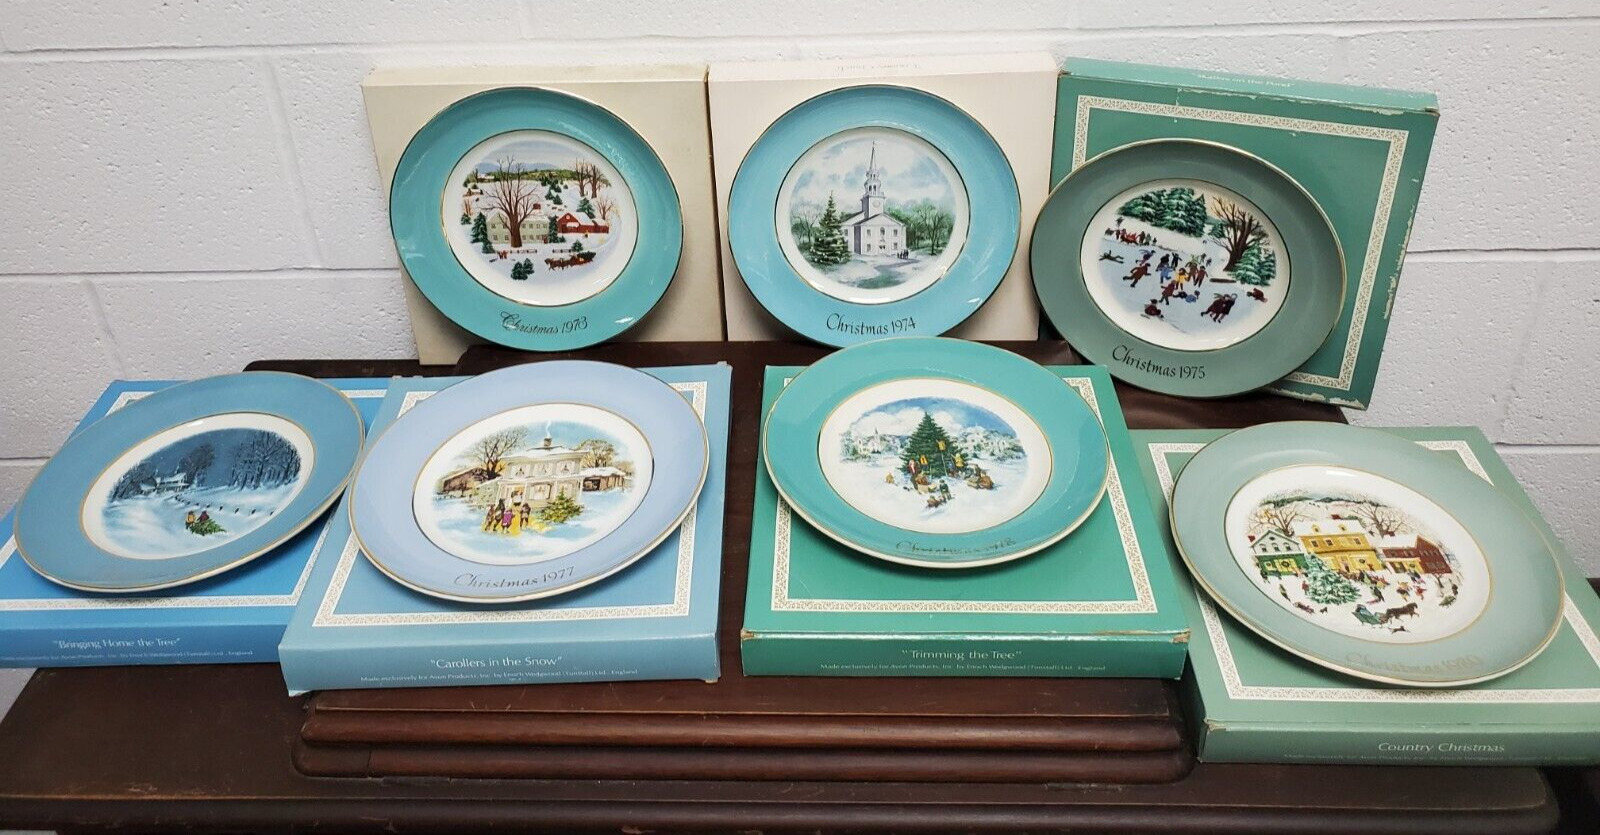 Lot of 7 Vintage Avon Christmas Plates 1973-1980 with Original Boxes